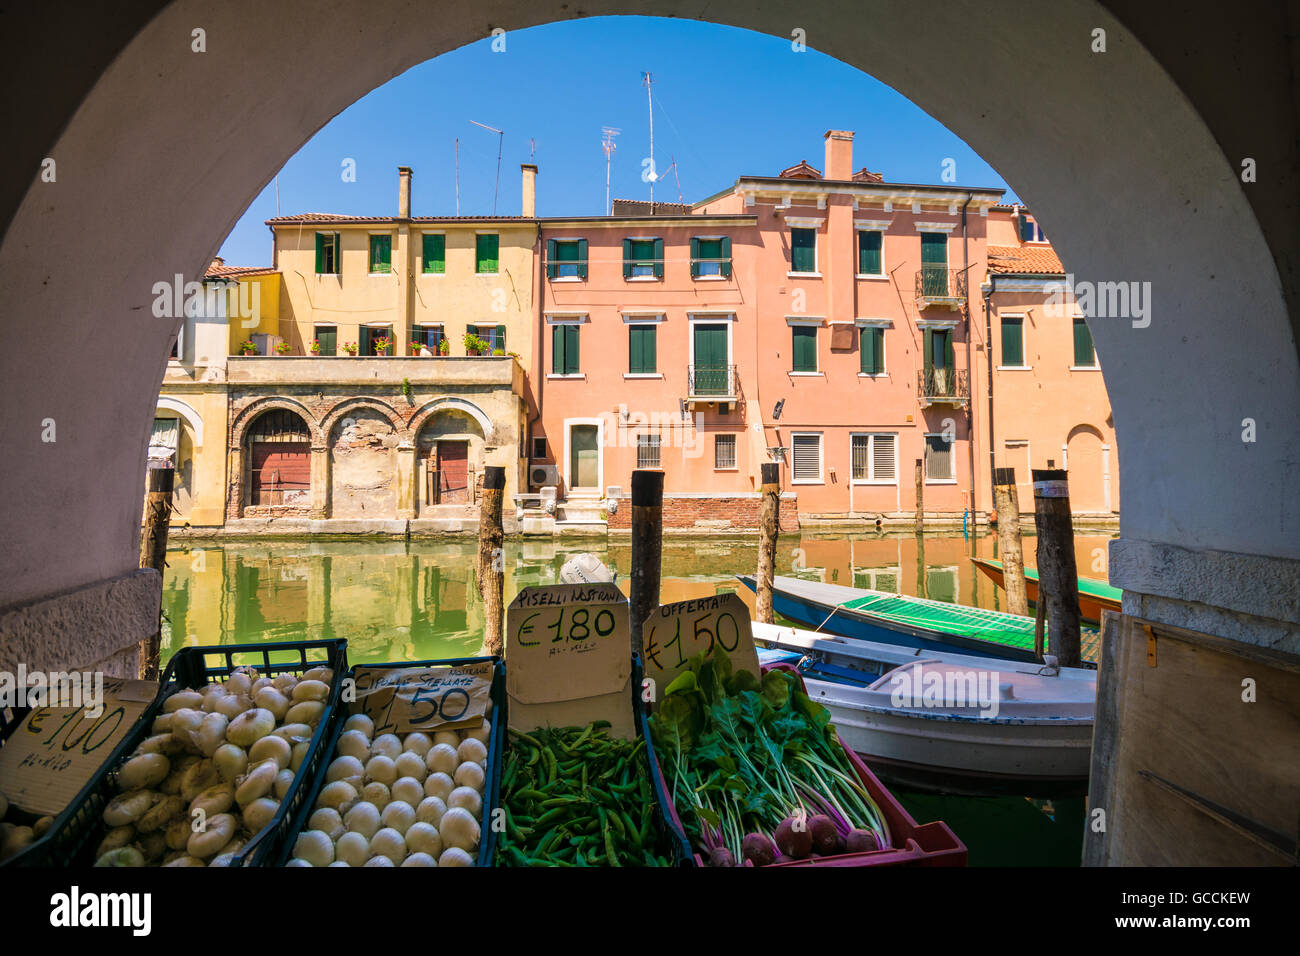 Chioggia glimpse from the arcades along the canals. Stock Photo